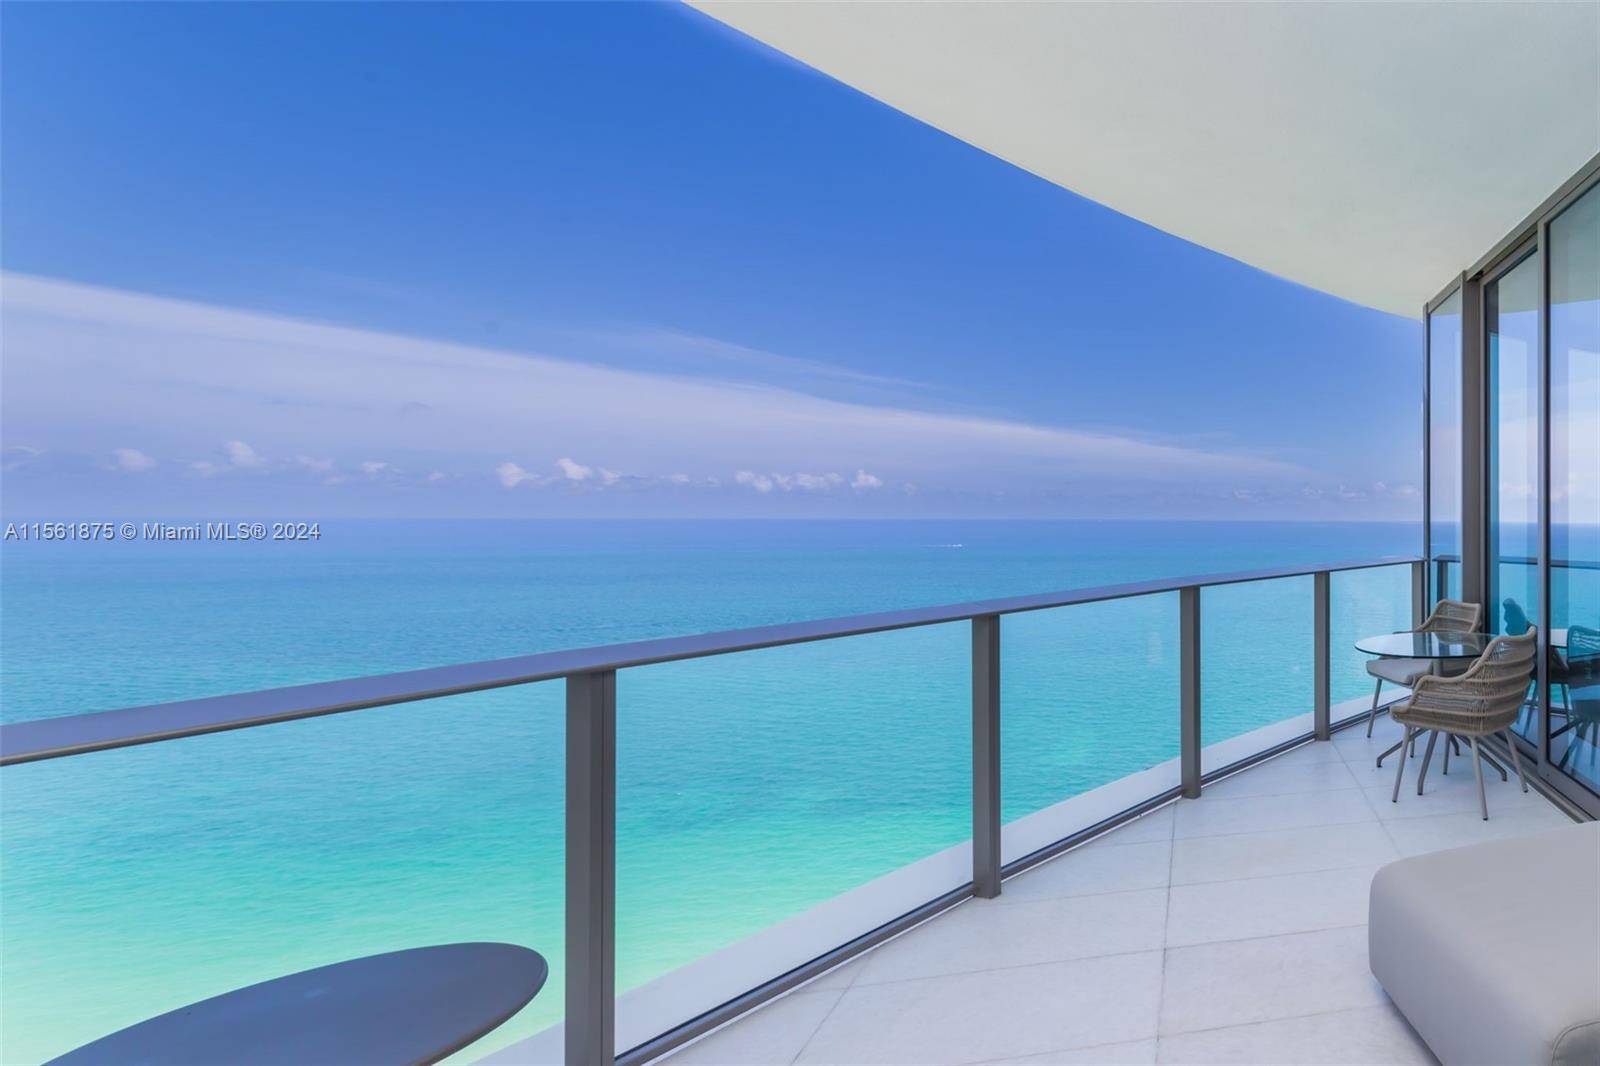 One of a kind Oceanfront Corner Residence with Private Elevator Landing, Two Primary Suites, Two Water Facing Terraces, and Water Views from nearly every room, including an Ocean Facing Kitchen.